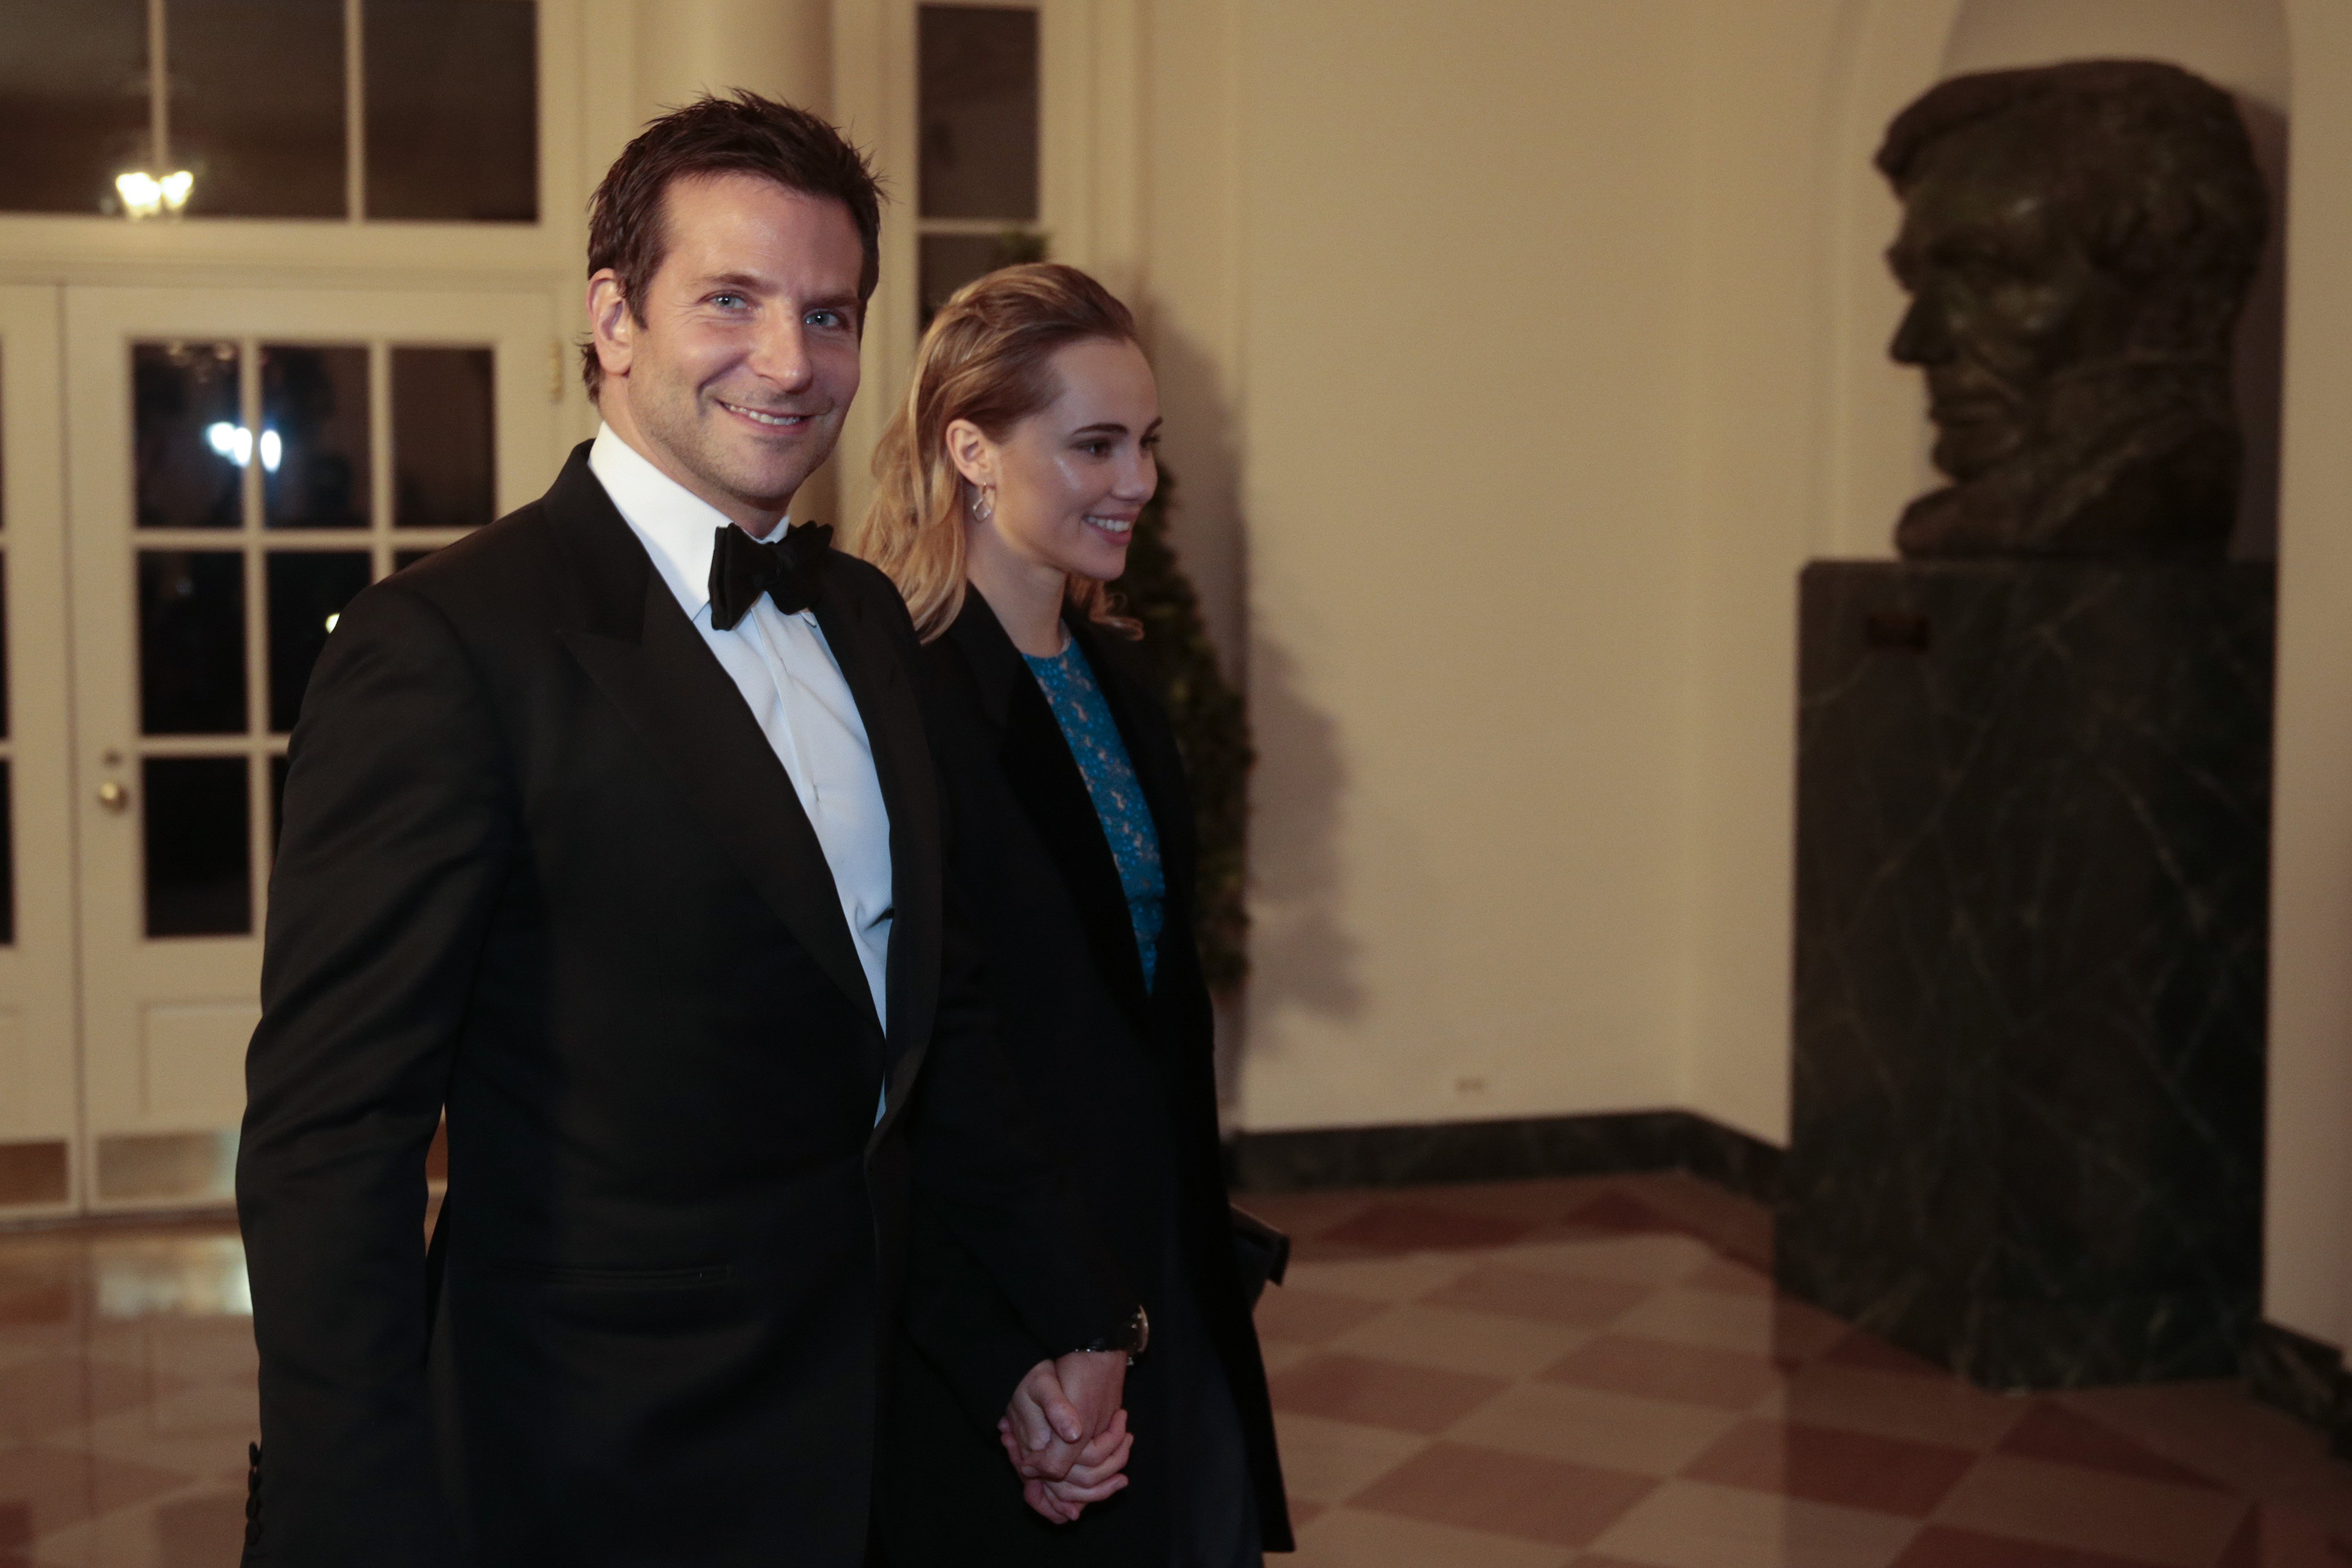 Actor Bradley Cooper, left, and Suki Waterhouse arrive to a state dinner hosted by U.S. President Barack Obama and U.S. first lady Michelle Obama in honor of French President Francois Hollande at the White House on February 11, 2014 in Washington. (Andrew Harrer—Pool/Getty Images)